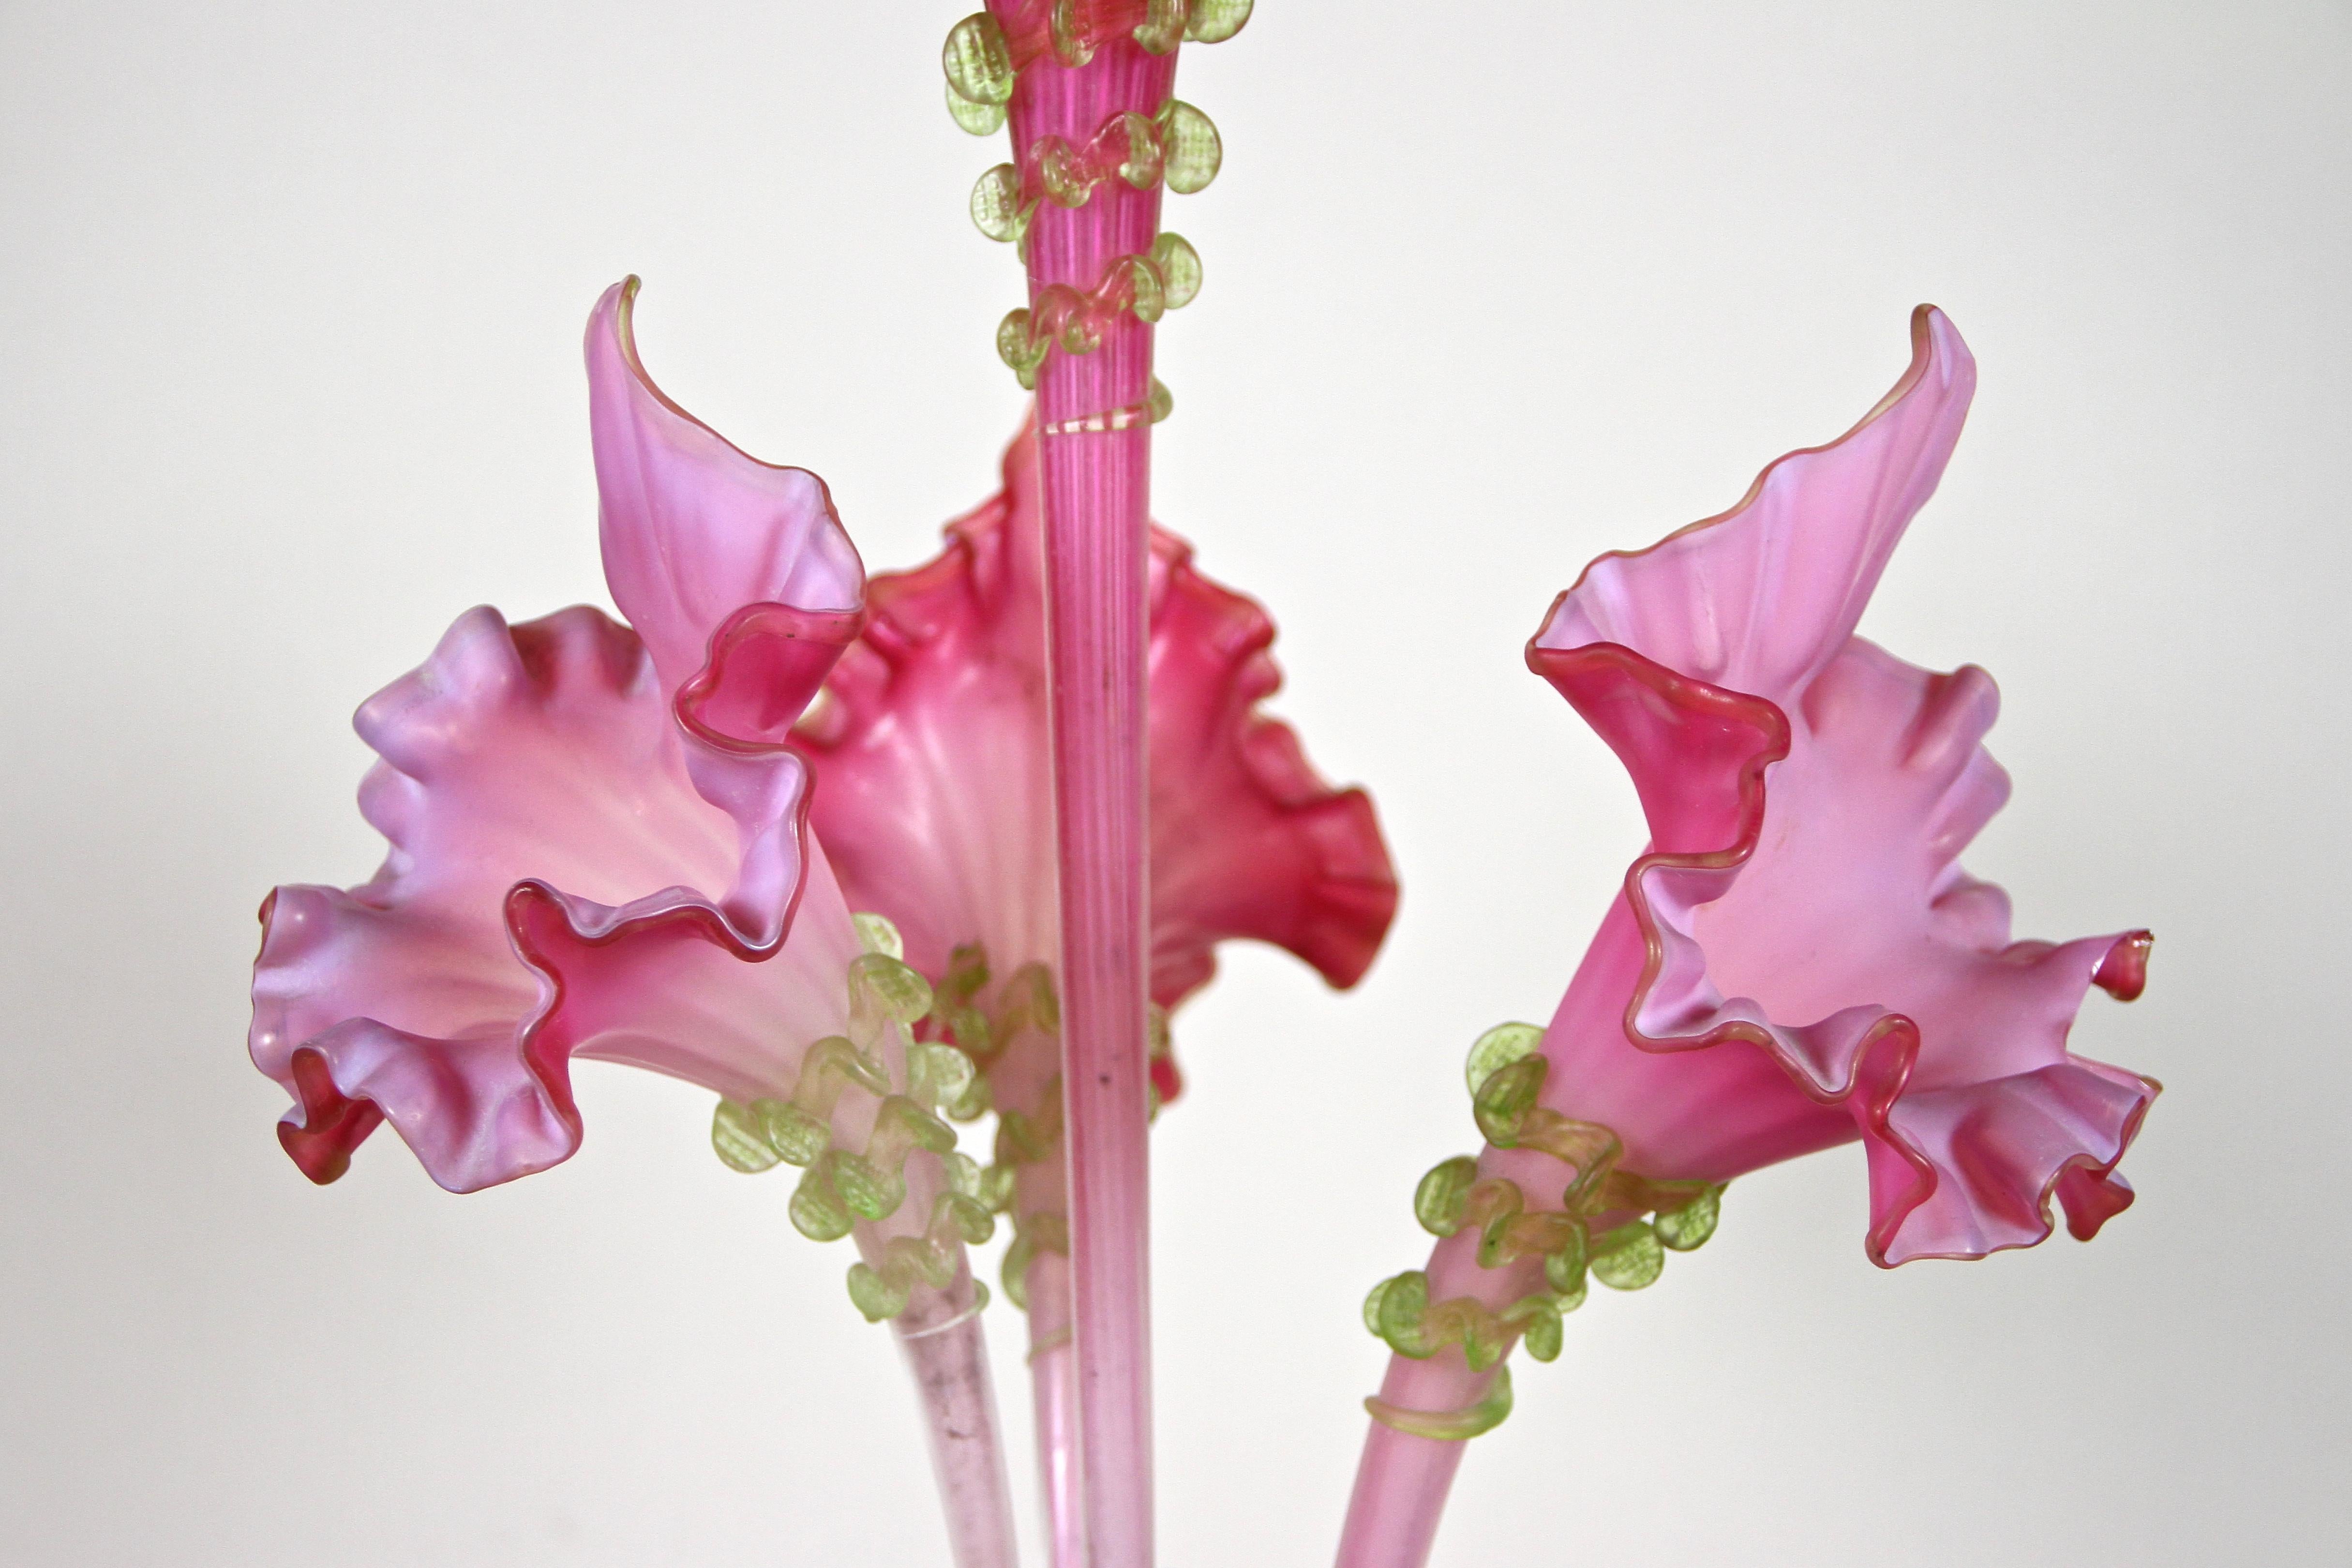 Amazing Art Nouveau glass flower centerpiece made in Austria around 1900. An absolute extraordinary designed centerpiece with three artfully worked, plugged pink frilly glass flower vases and a larger one which is screwed in the center. Every flower